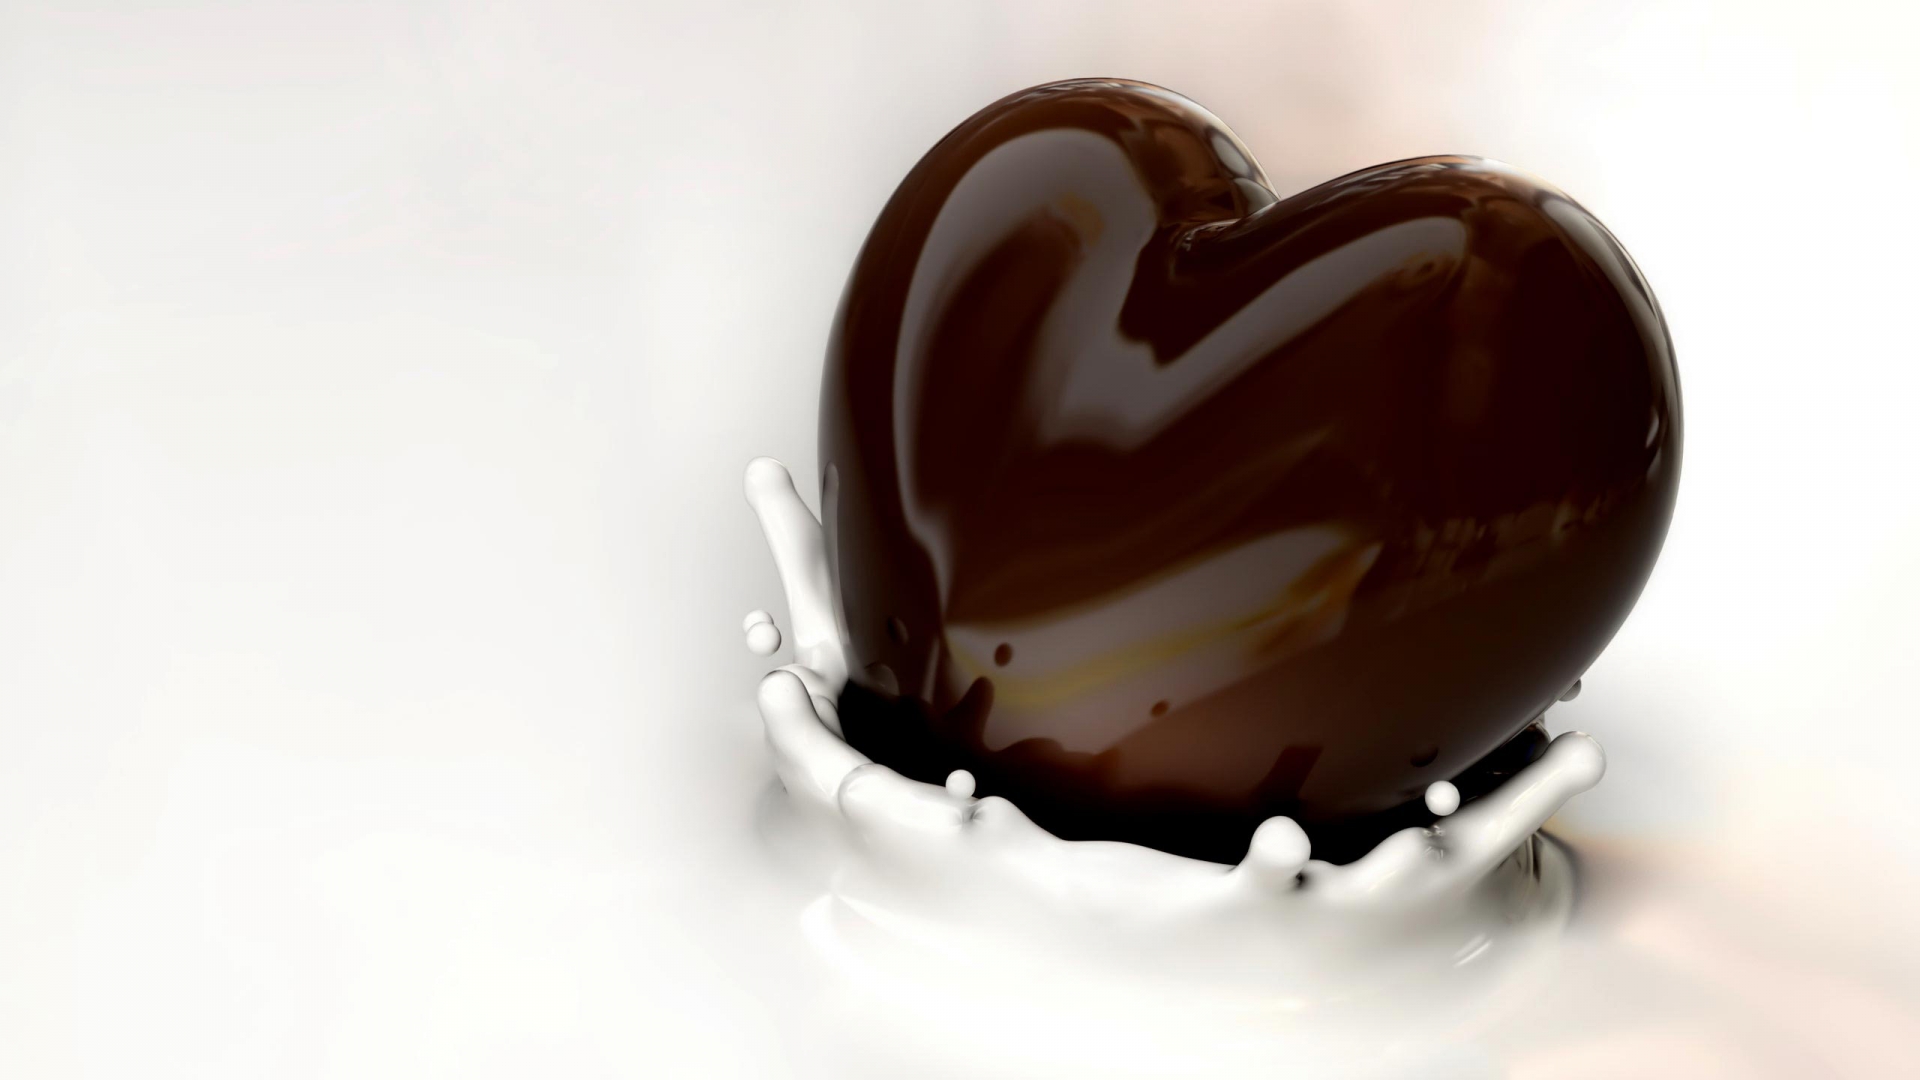 Heart Chocolate and Milk for 1920 x 1080 HDTV 1080p resolution